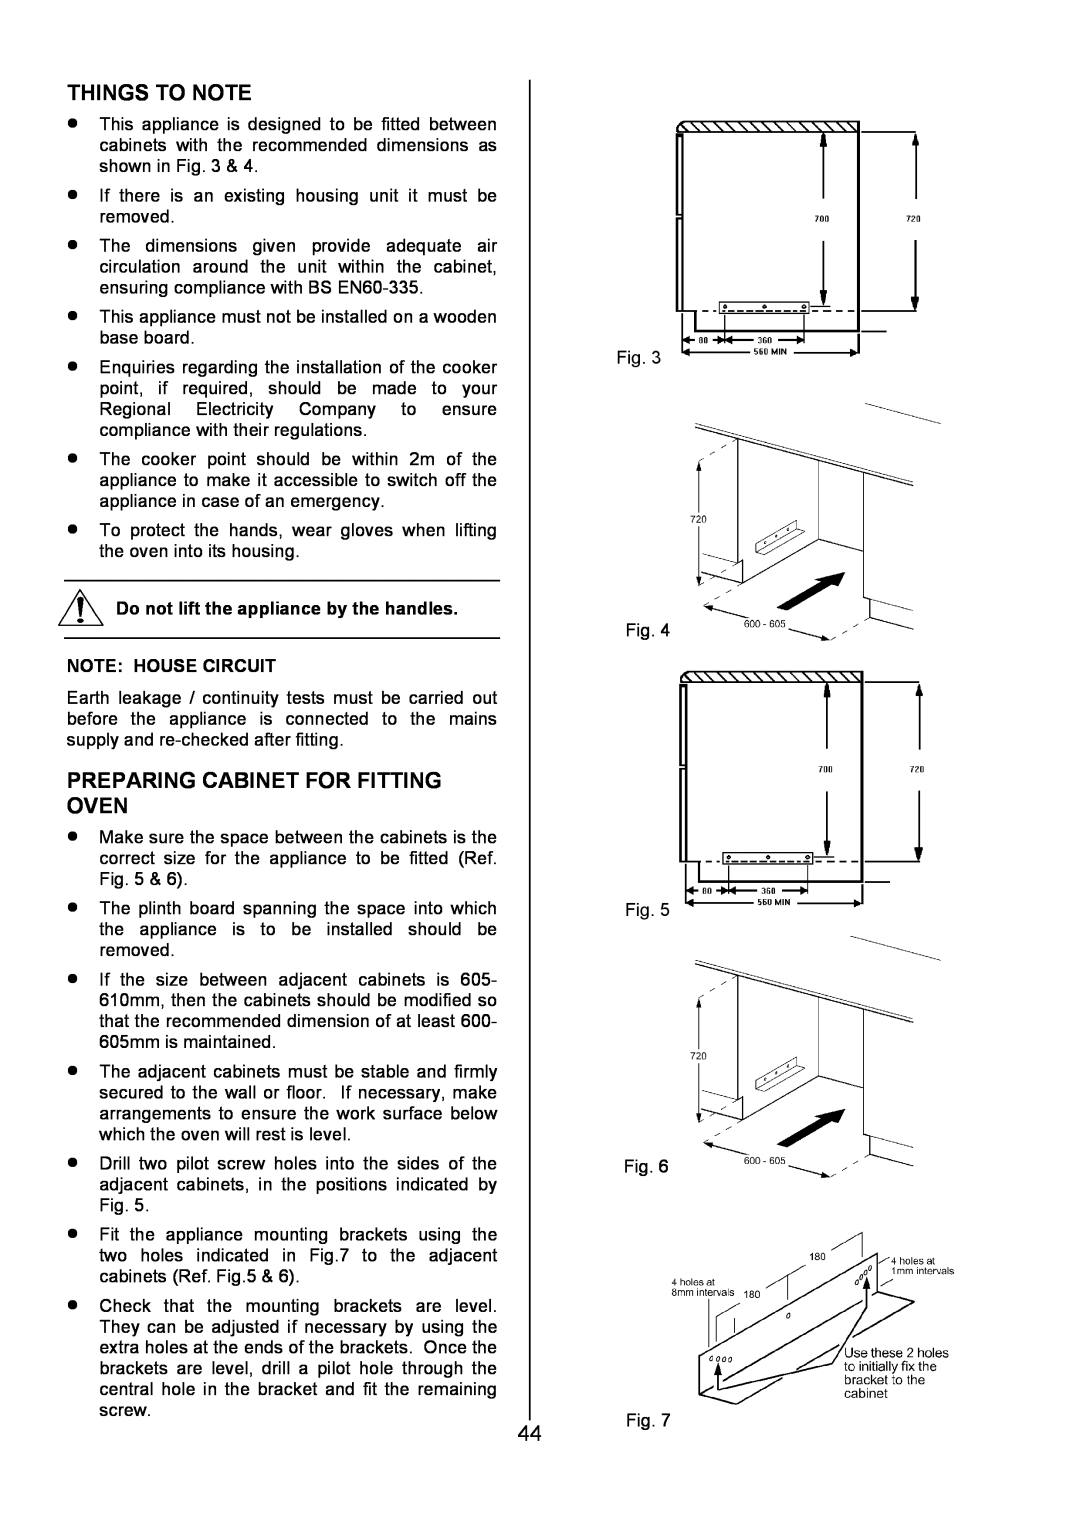 AEG U7101-4, 311704300 manual Preparing Cabinet For Fitting Oven, Things To Note, Do not lift the appliance by the handles 